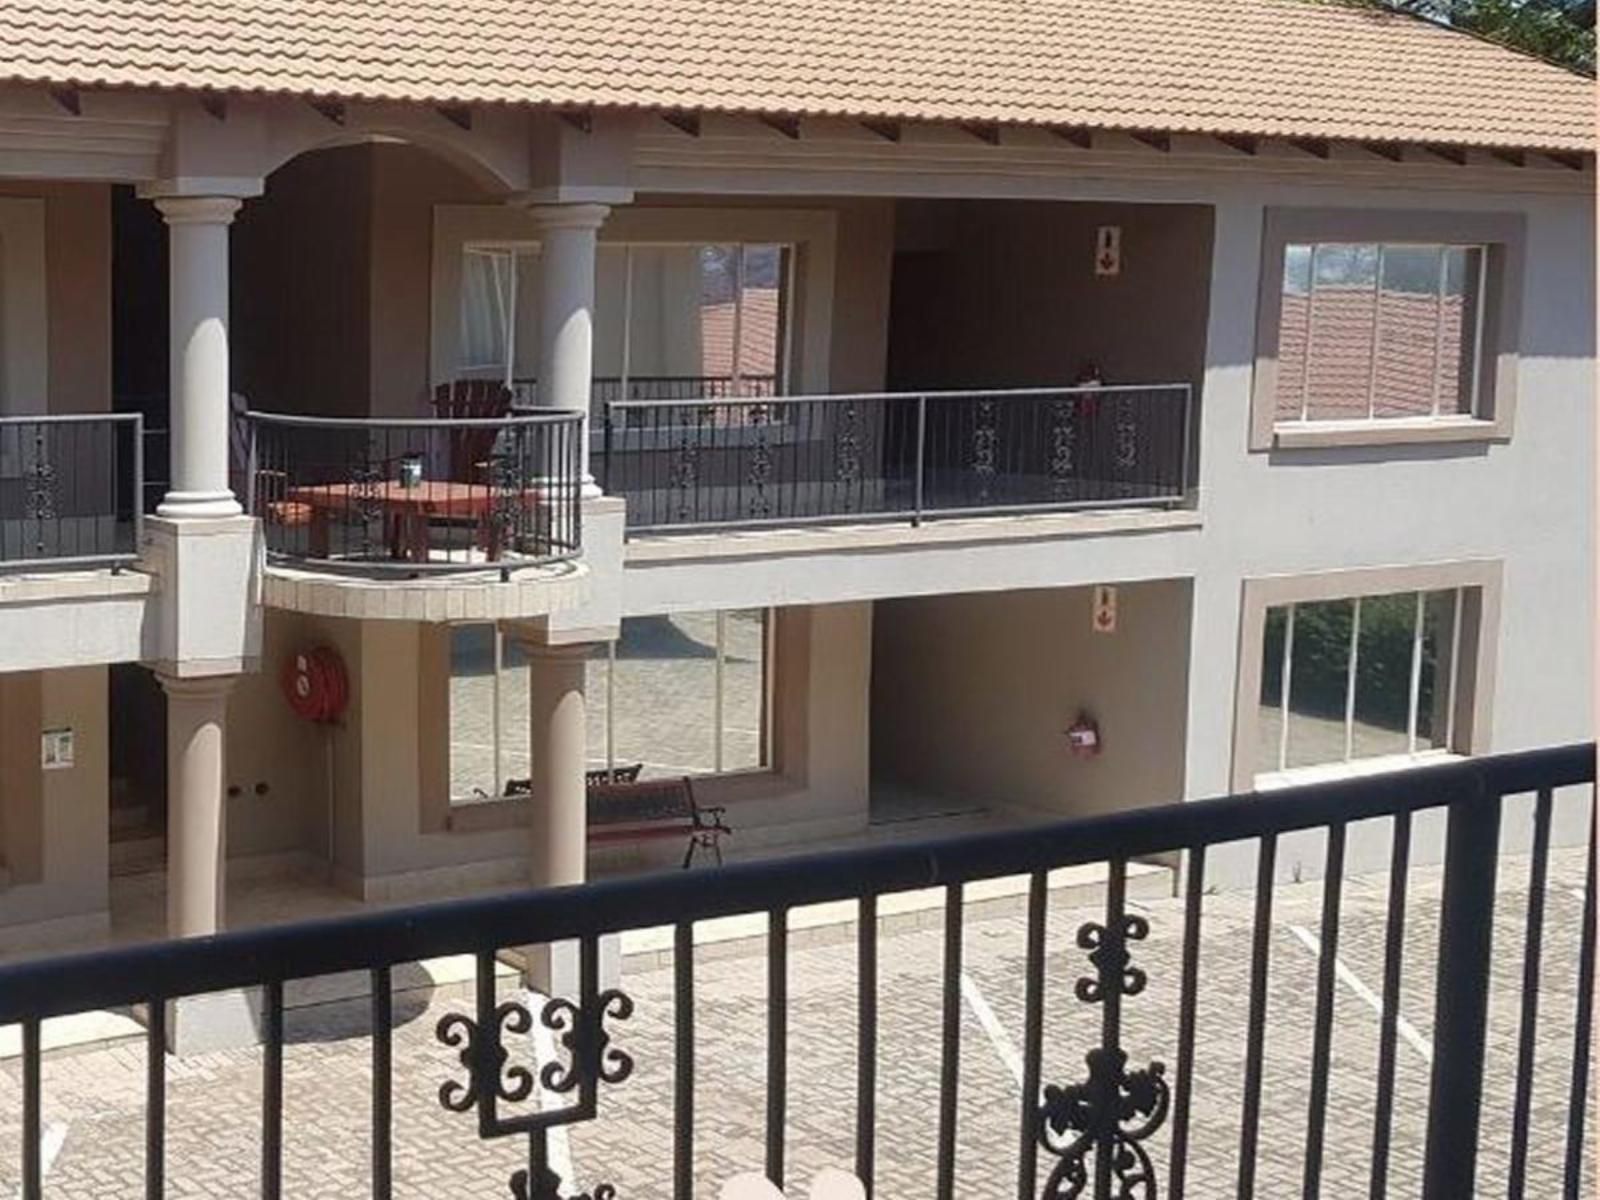 Country Blue Luxury Guest House Polokwane Ext 4 Polokwane Pietersburg Limpopo Province South Africa Balcony, Architecture, House, Building, Swimming Pool